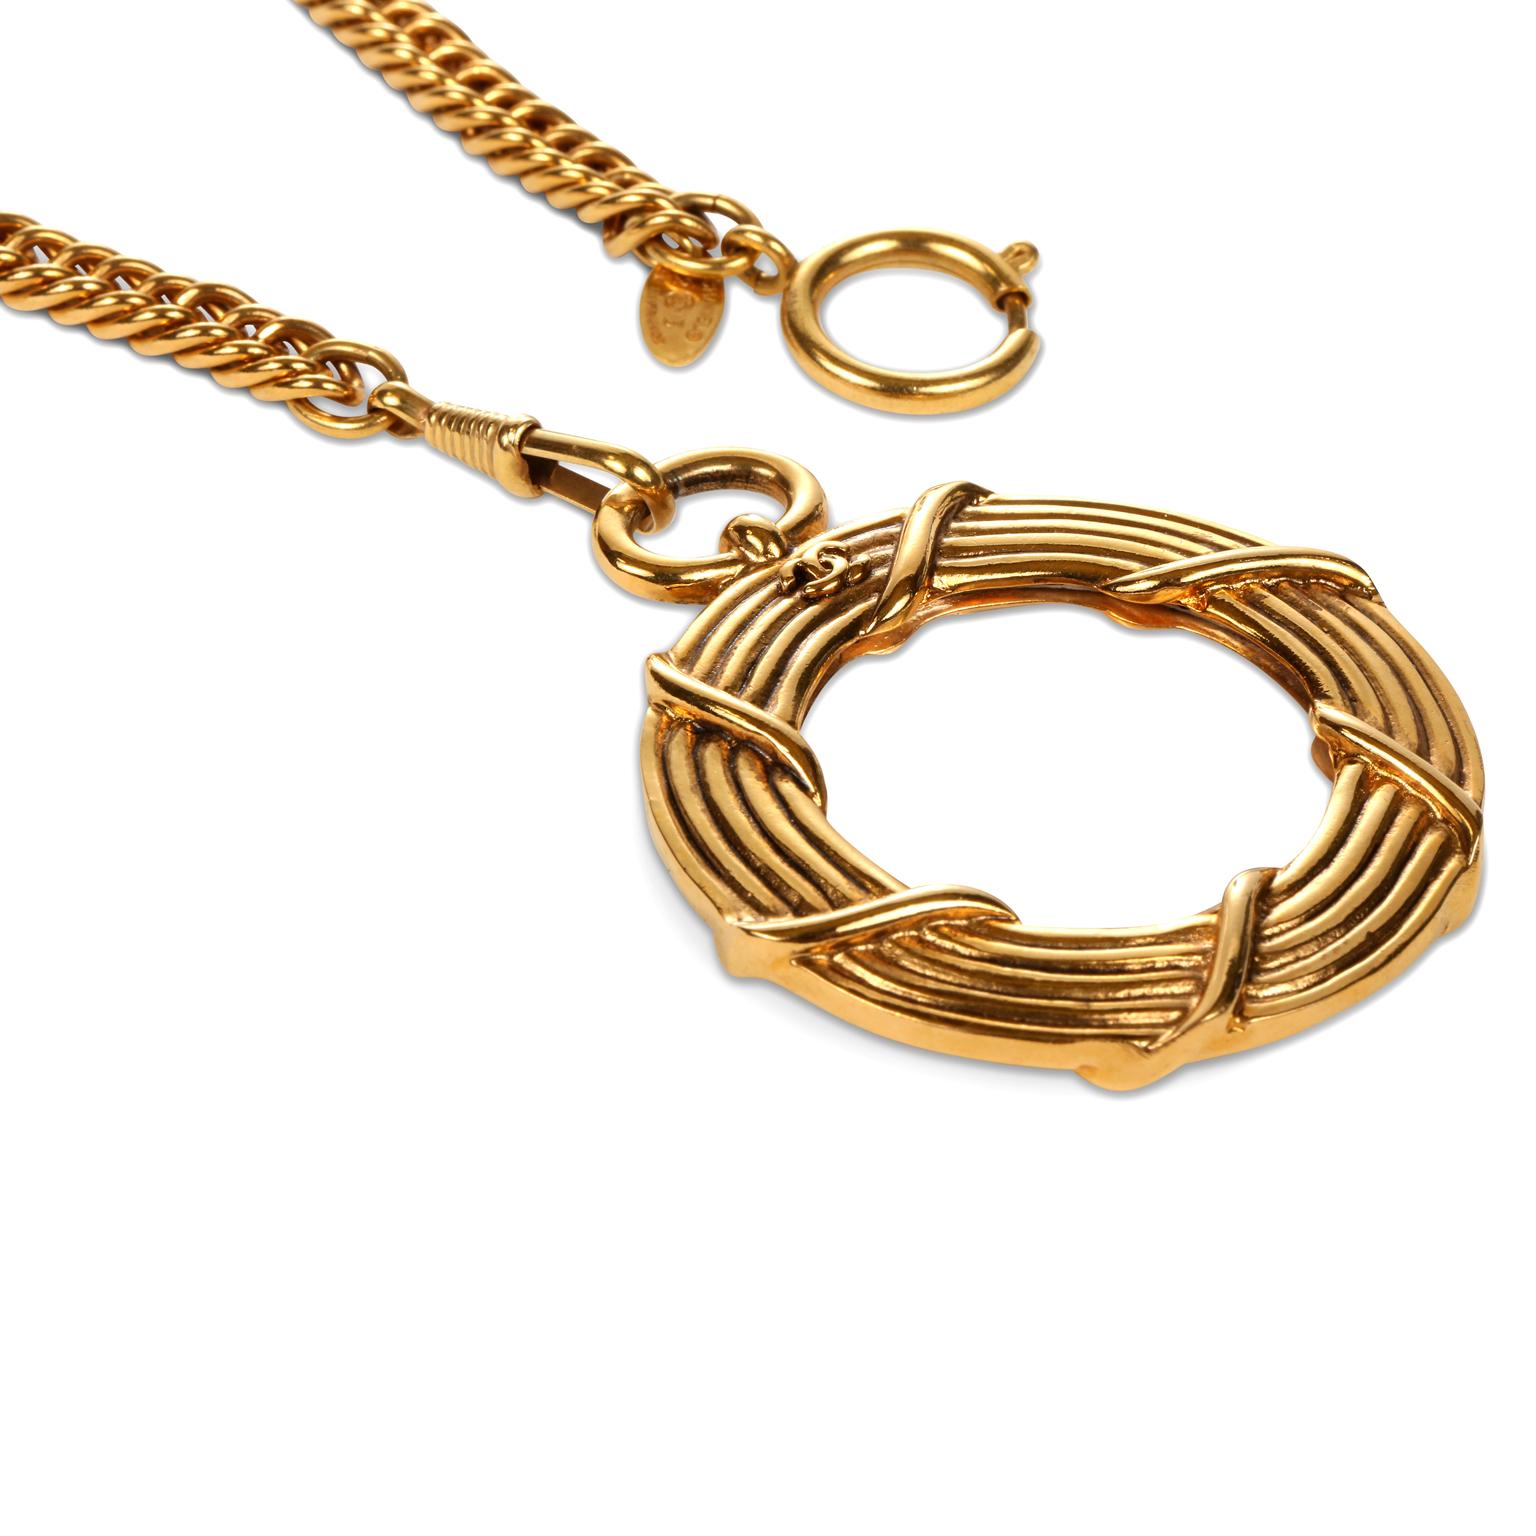 This authentic Chanel Gold Rope Magnifier  Necklace is in excellent vintage condition from the late 1980’s.   Large gold tone circular magnifier pendant dangles from a long linked chain.   Approximately 34 inches, pendant approximately 2 inches. 